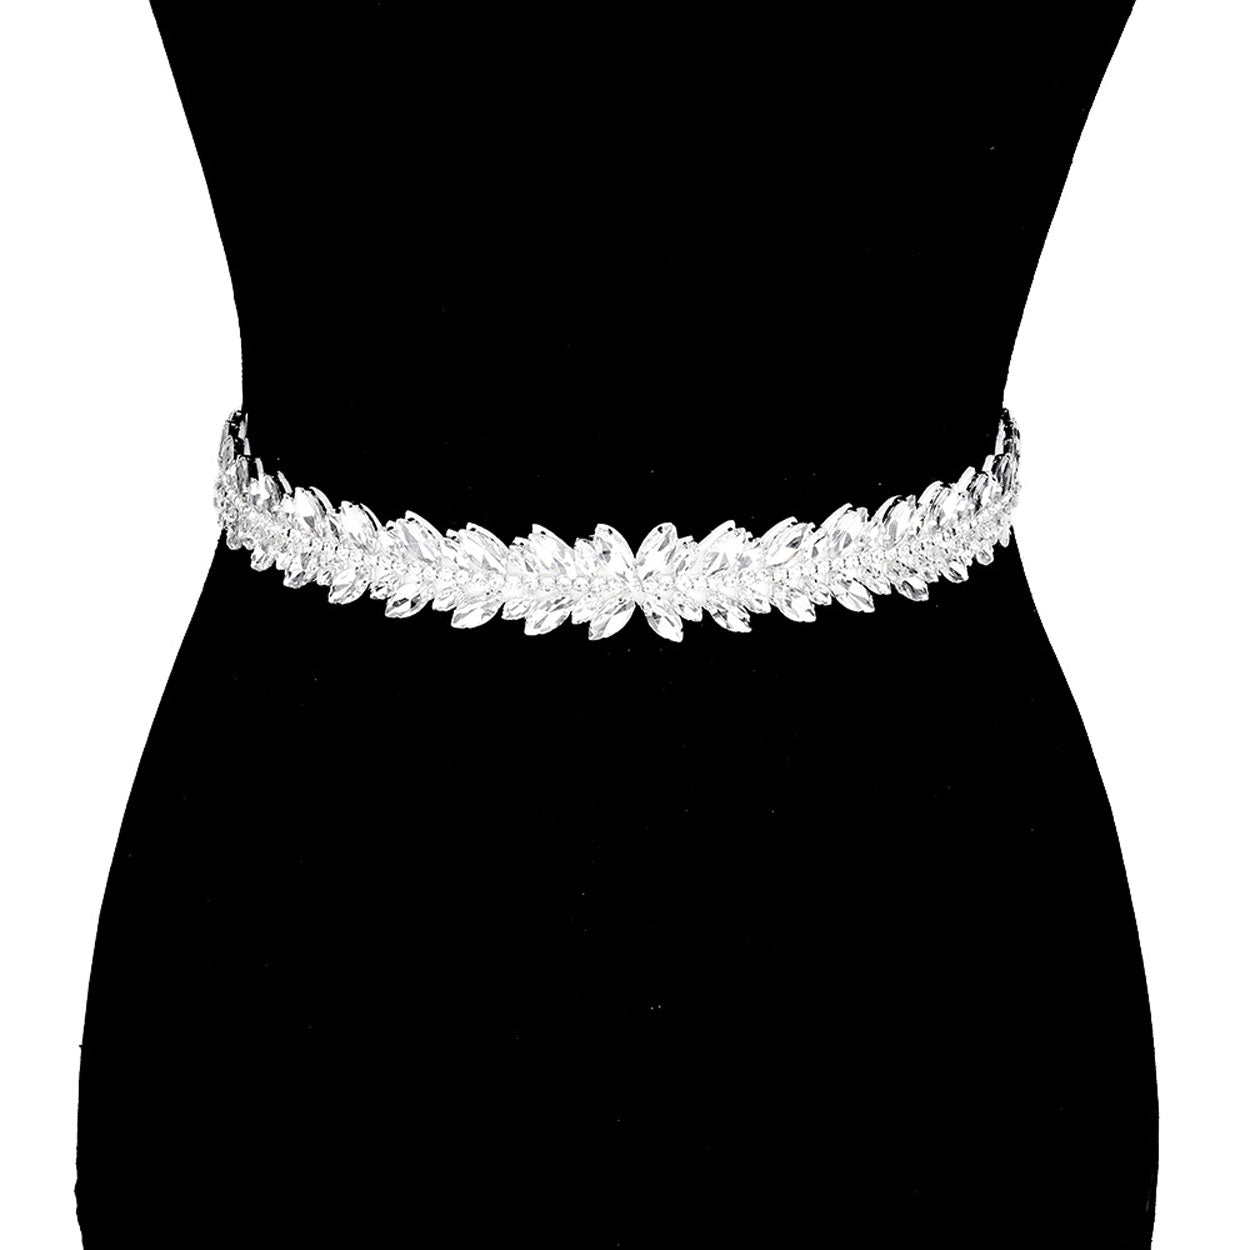 AB Silver White Crystal Sash Ribbon Bridal Wedding Belt Headband. These headband will make you feel extra glamorous. Push back your hair with this exquisite knotted headband, spice up any plain outfit! Be ready to receive compliments. Be the ultimate trendsetter wearing this chic headband with all your stylish outfits! Exquisite enough to use on your wedding day.